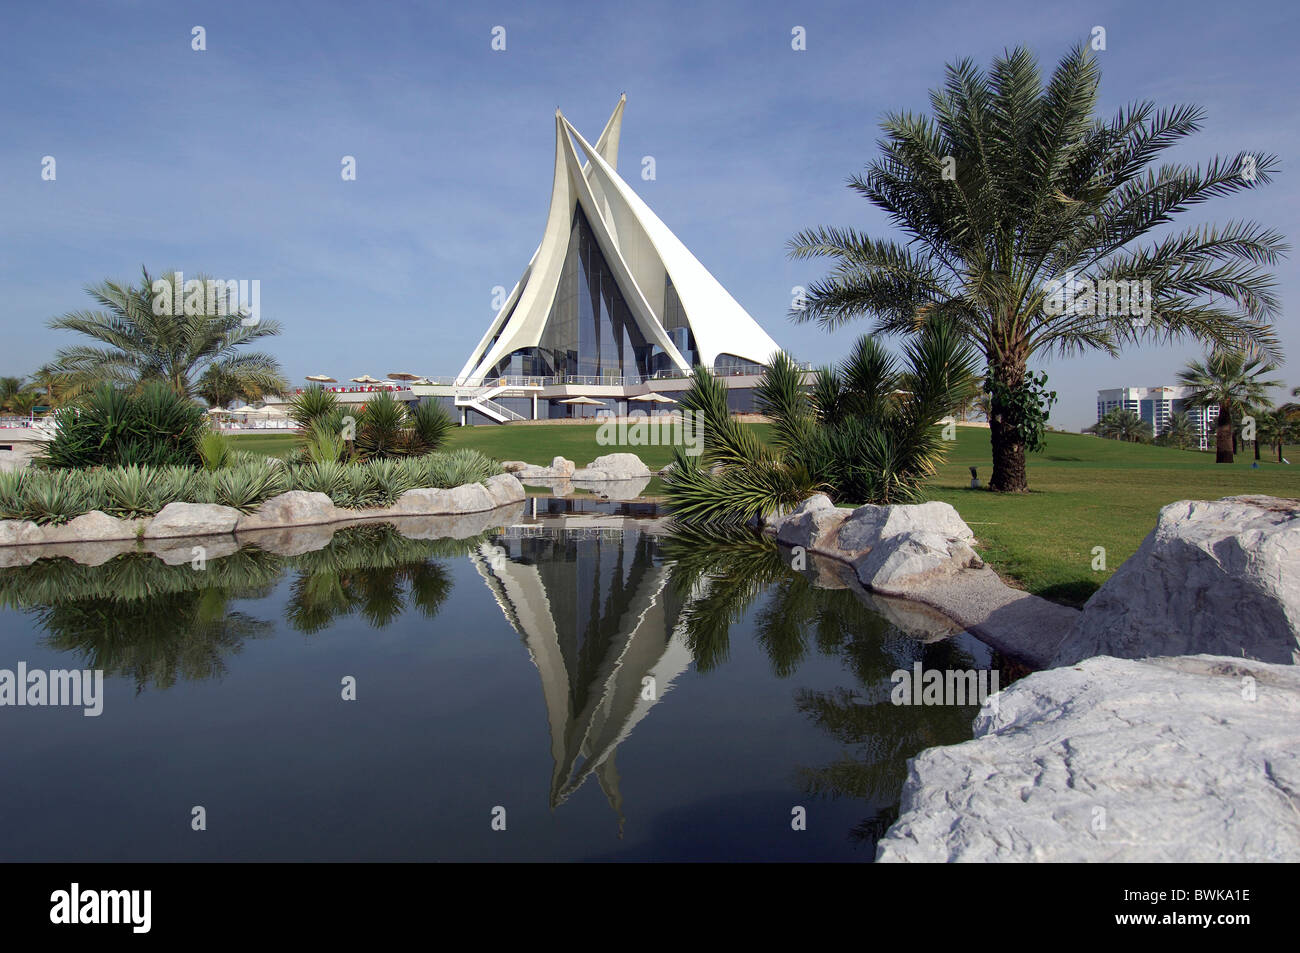 water pond clubhouse club house moulder architecture gulf golf construction golf course Dubai Creek gulf go Stock Photo